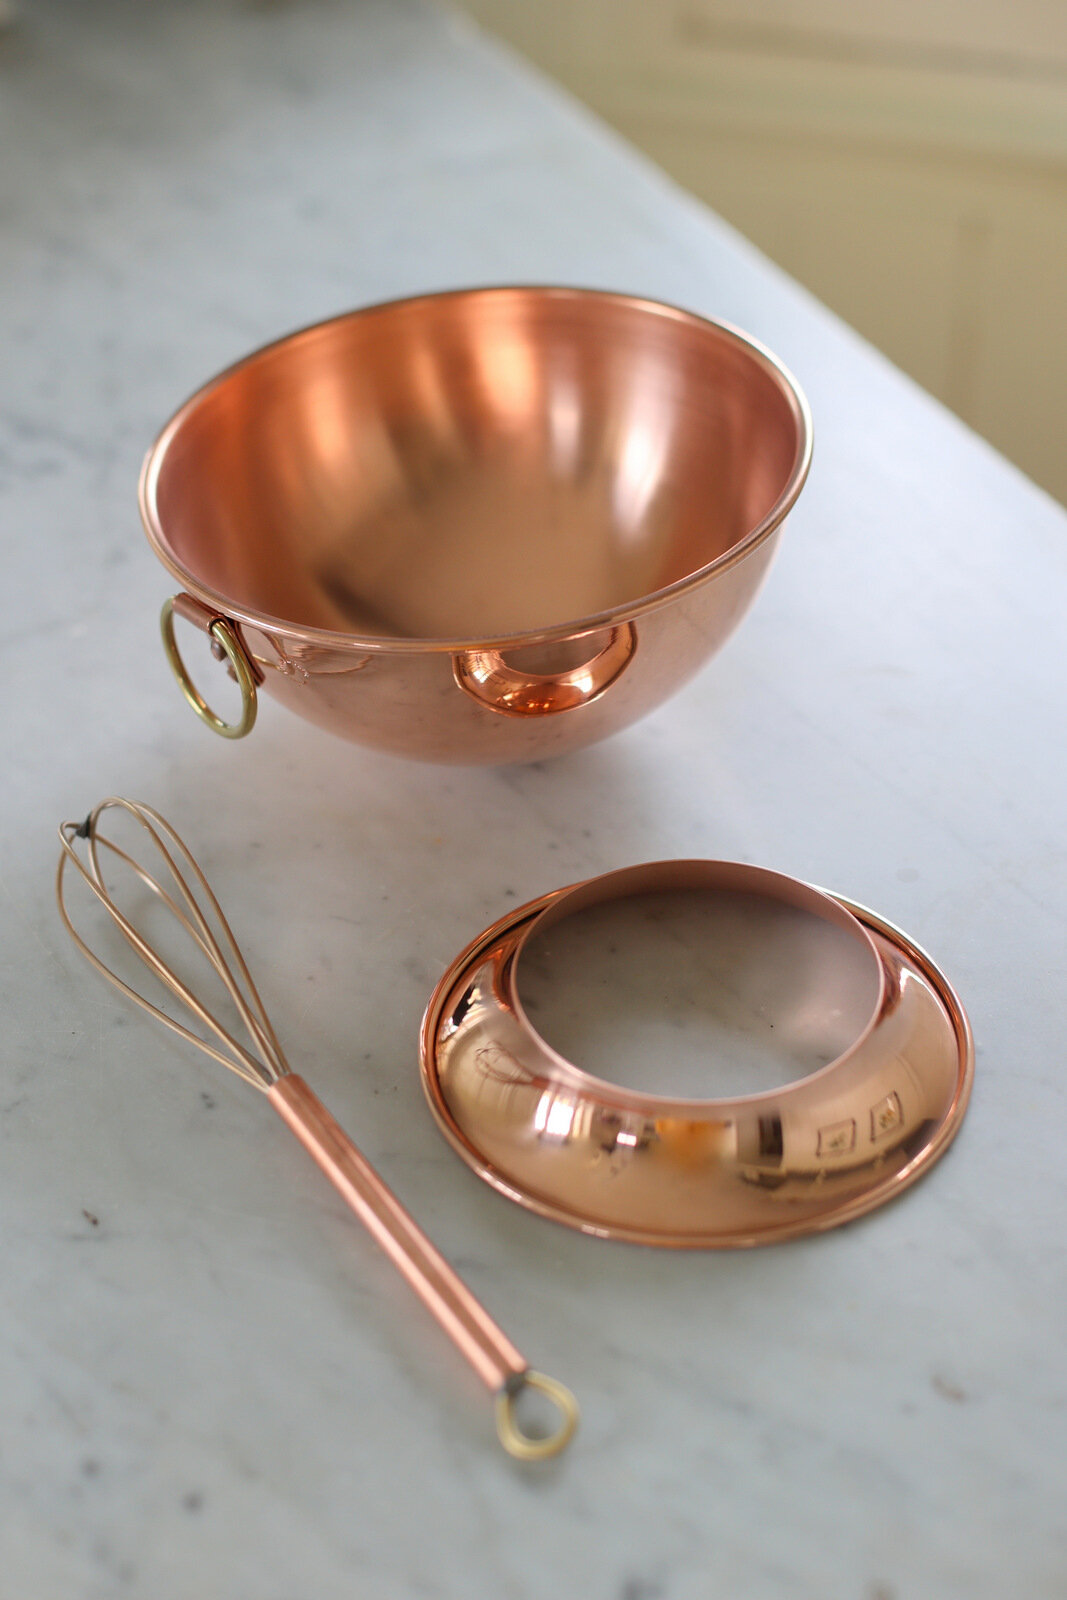 Mauviel Copper Beating Bowl with Metal Stand